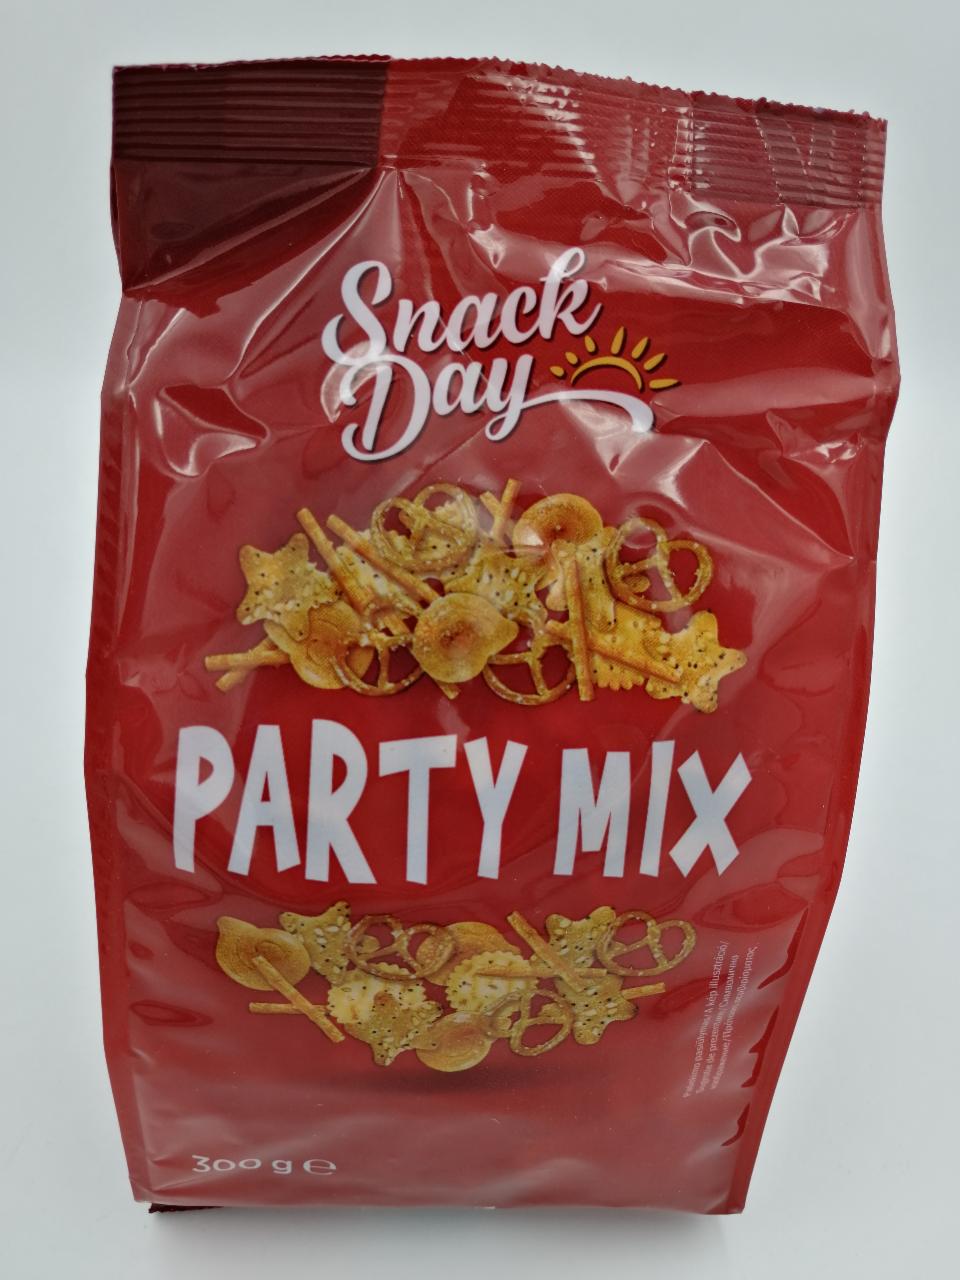 Fotografie - Party Mix Snack Day